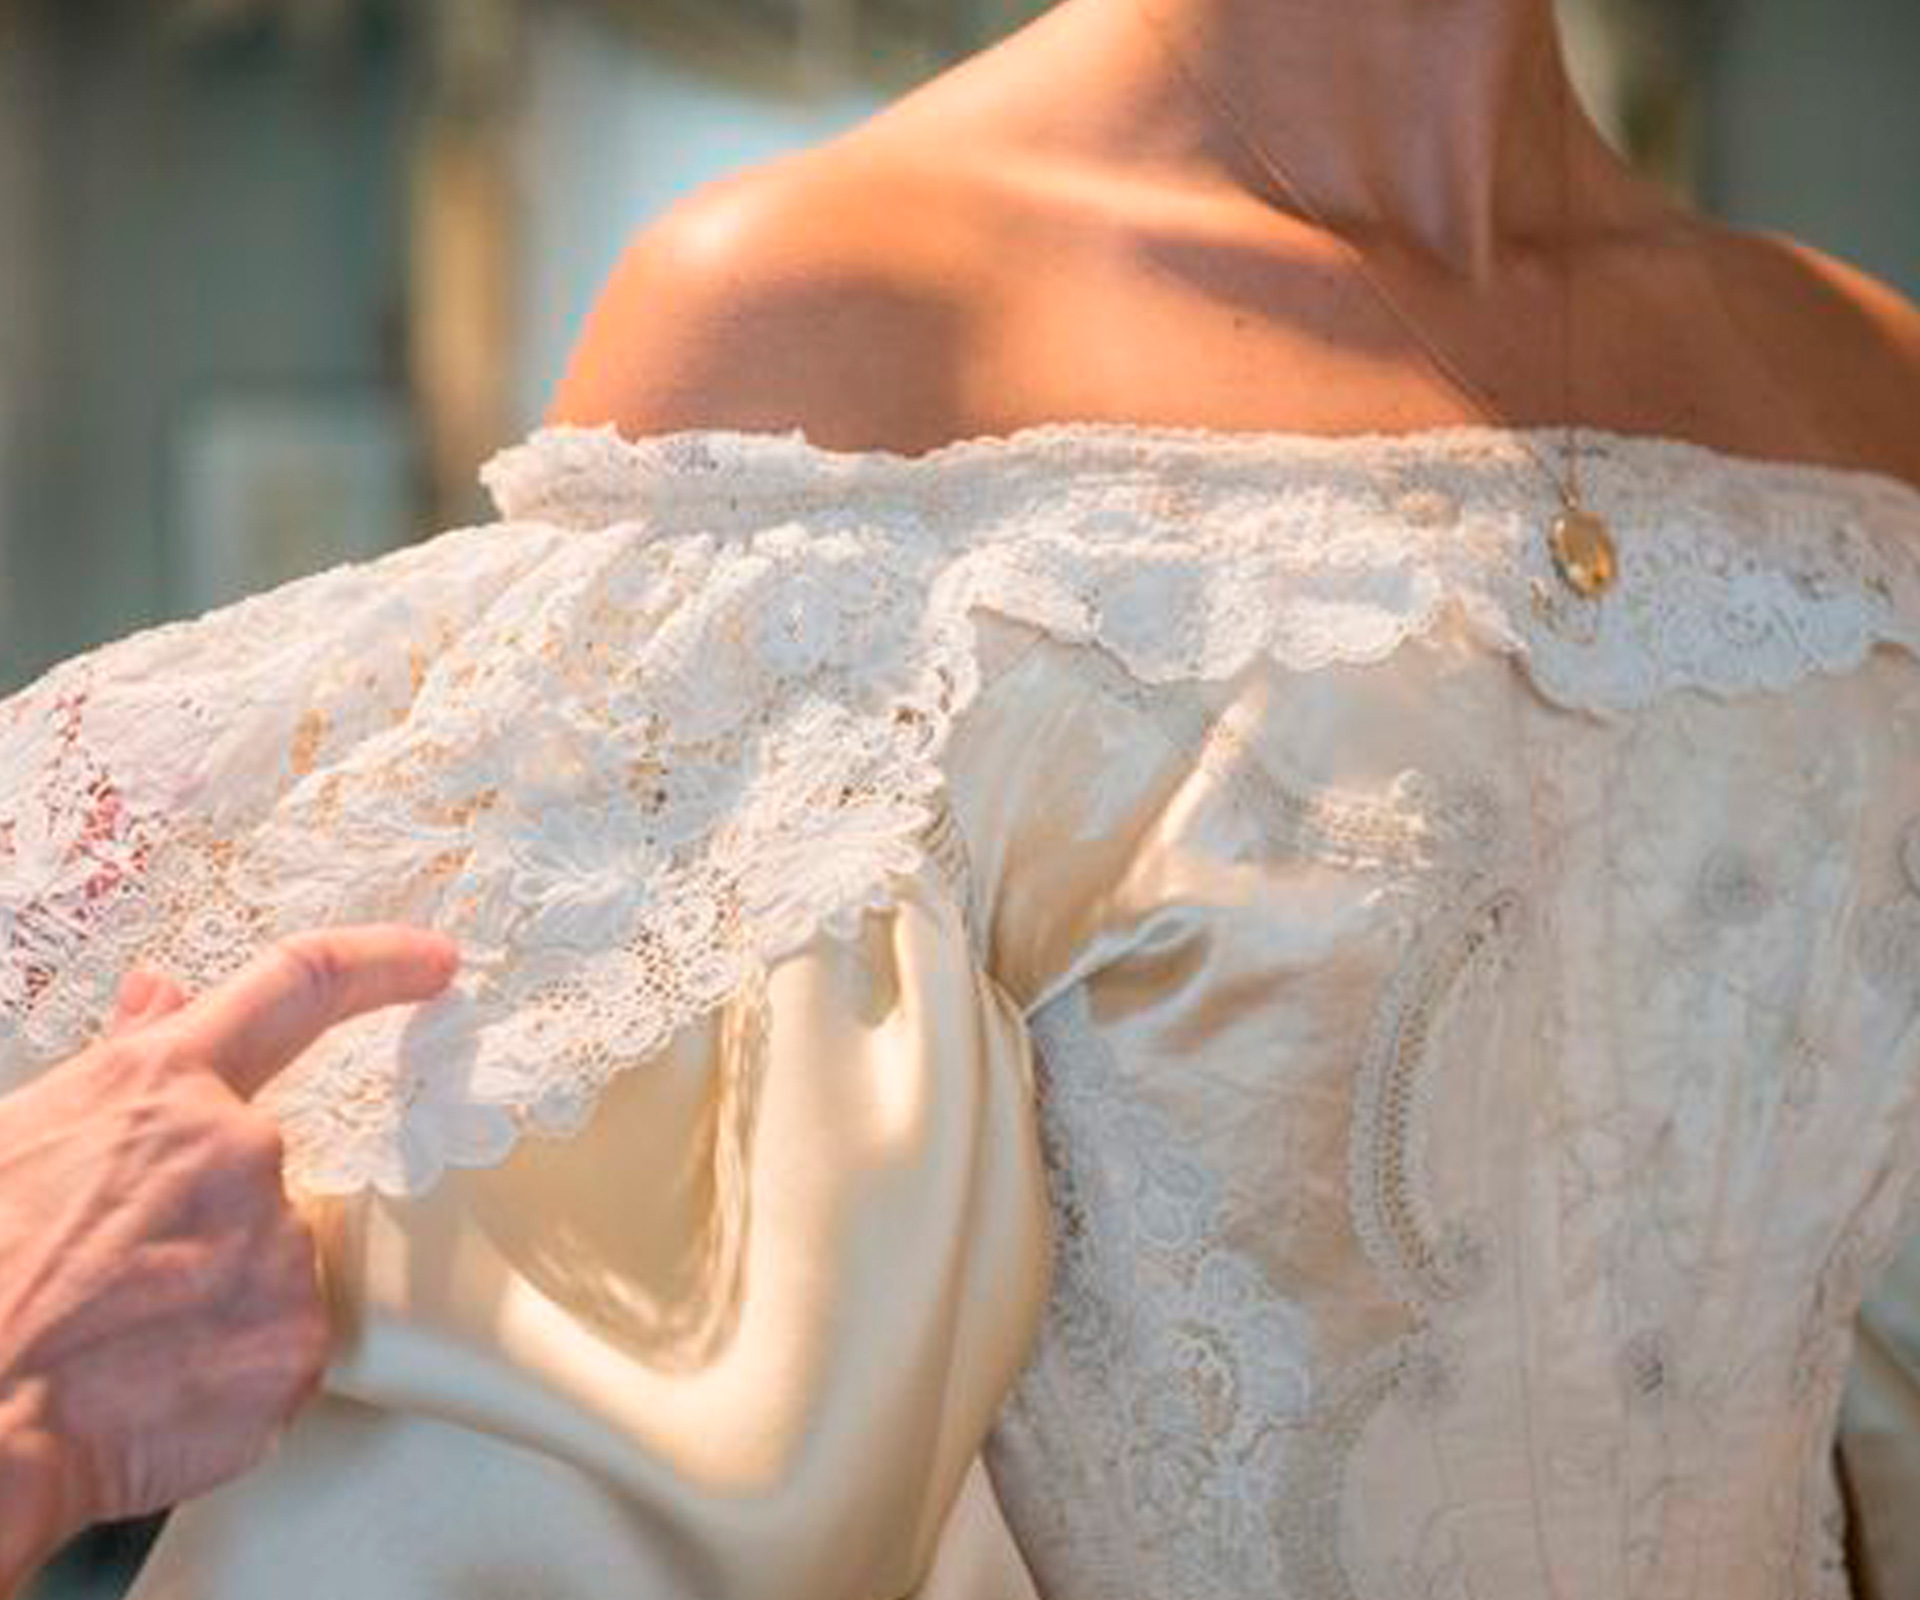 Bride-to-be is 11th in family to wear same wedding dress